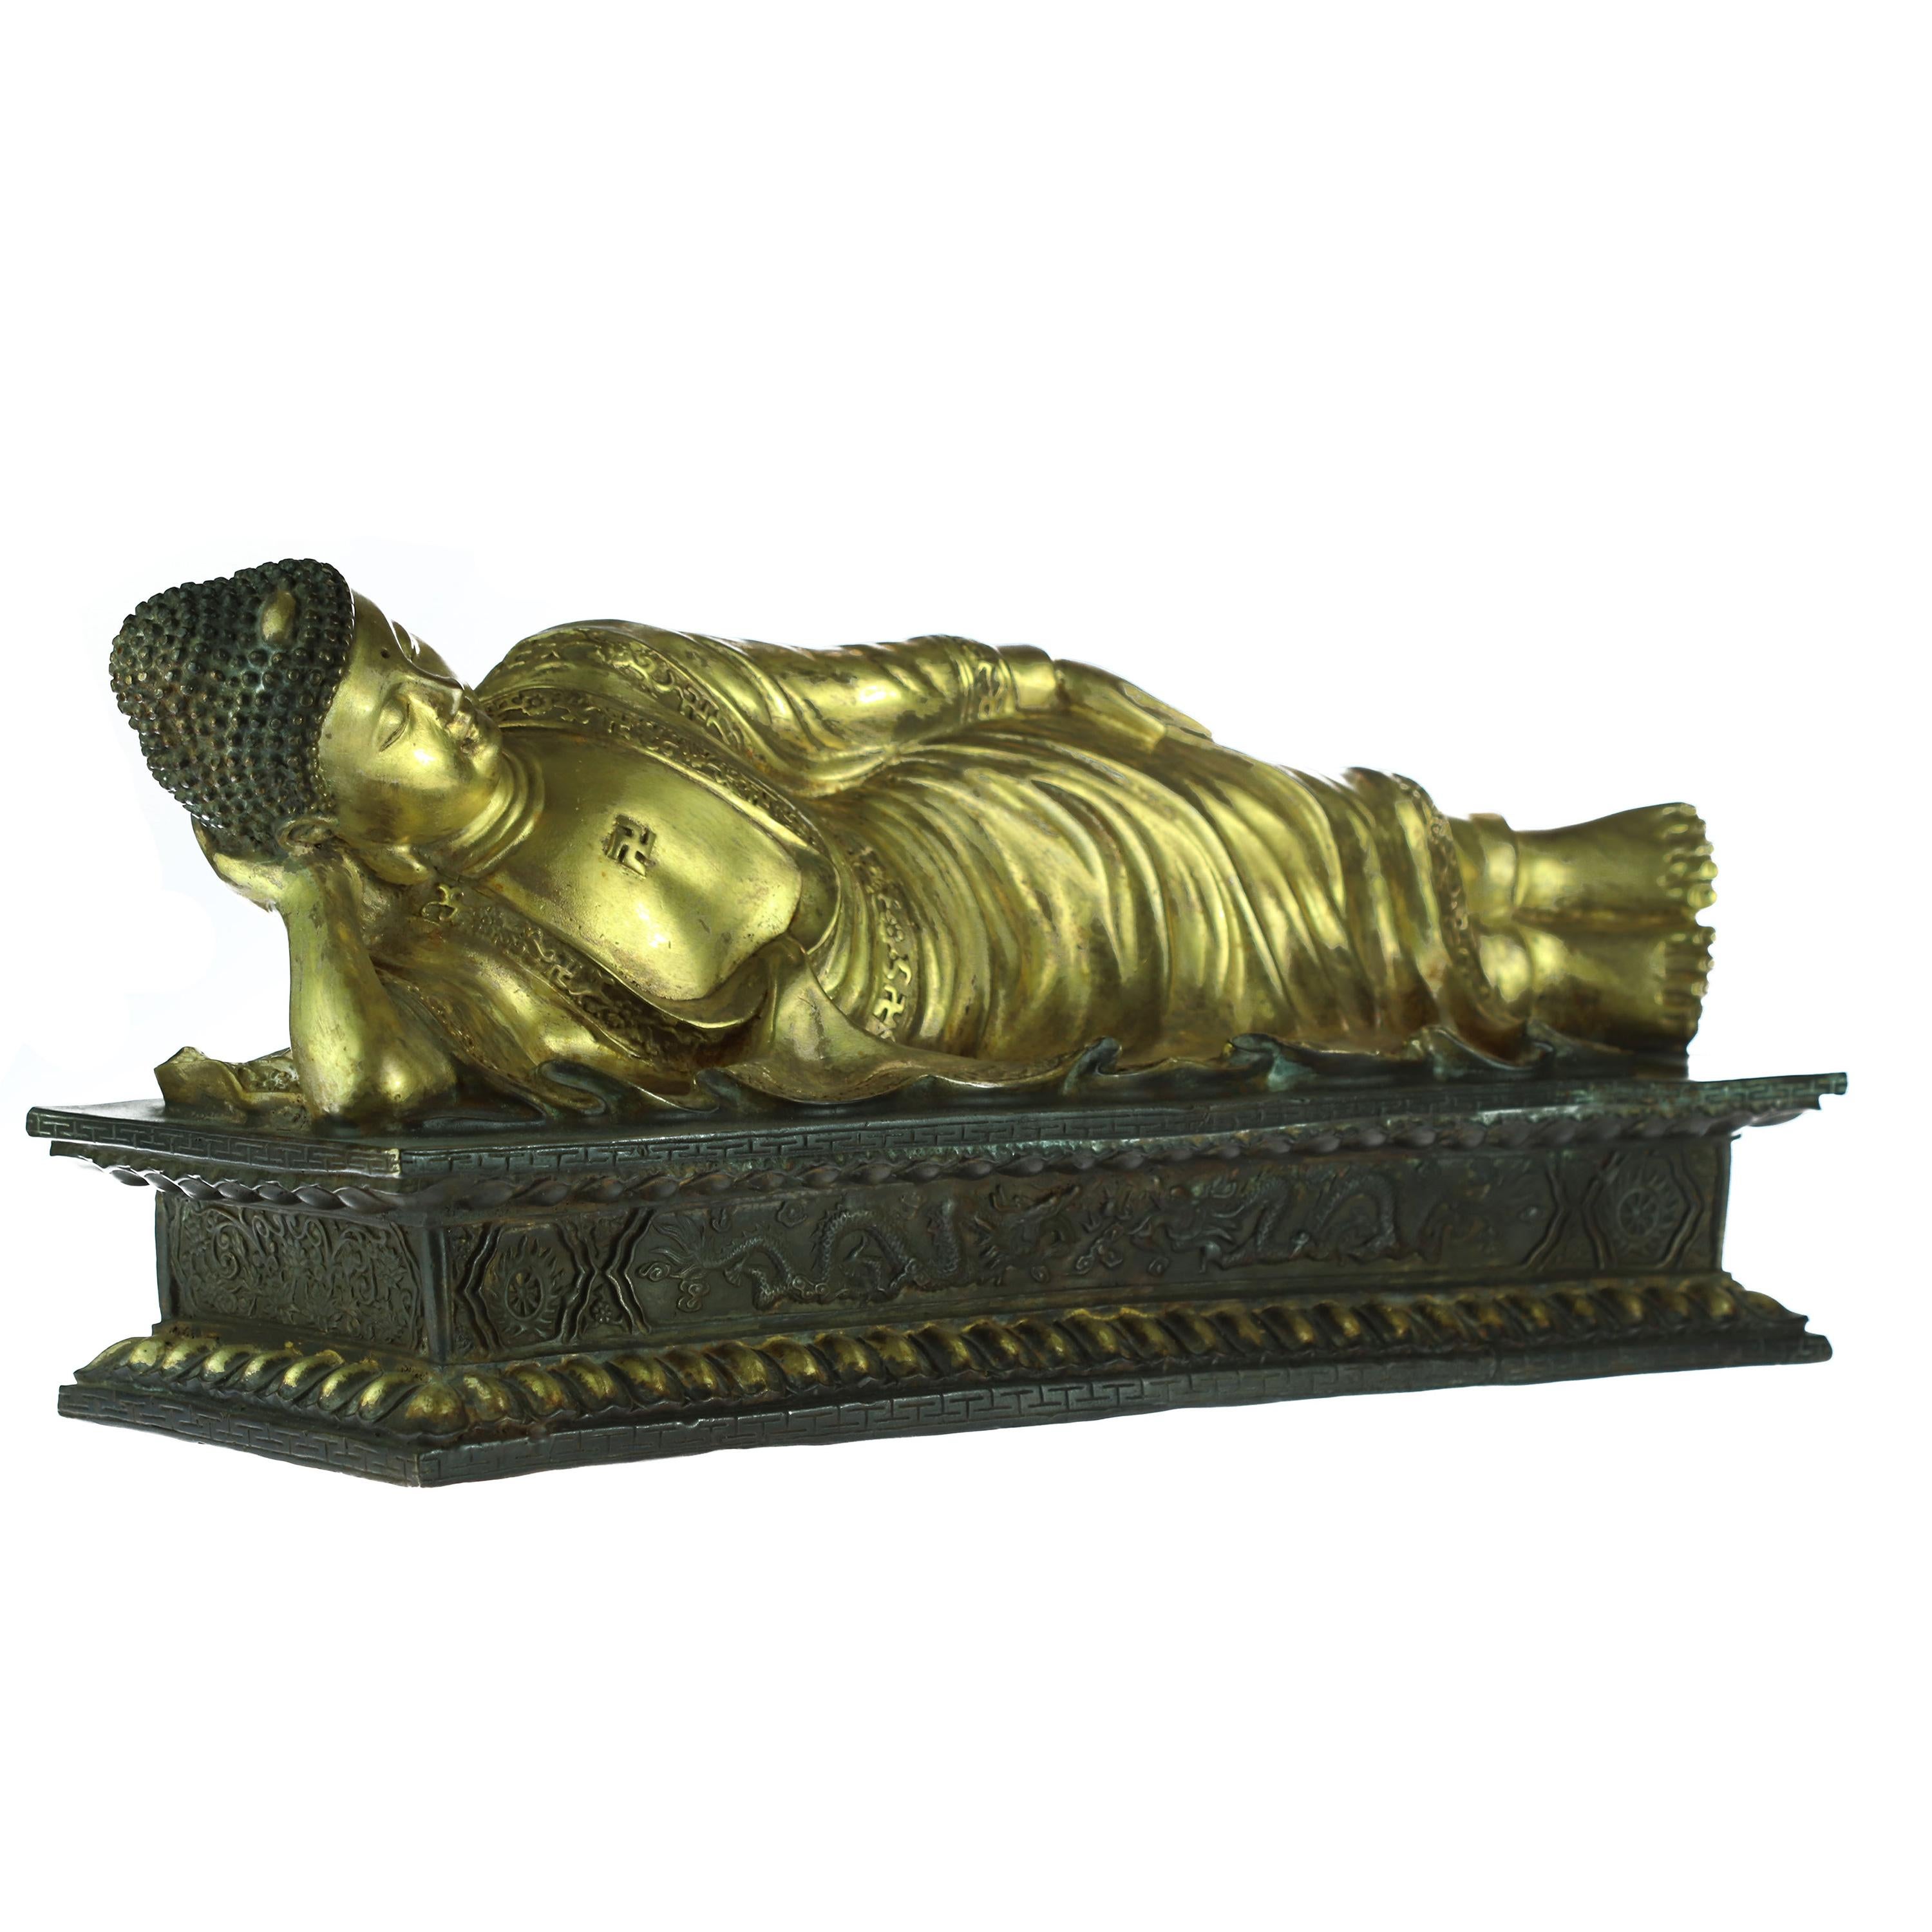 Breathtaking sculpture full of love and meaning. Hand carved bronze reclining Buddha that represents Buddha lying down and is a major iconographic and statuary pattern of Buddhism. It represents the historical Buddha during his last illness, about